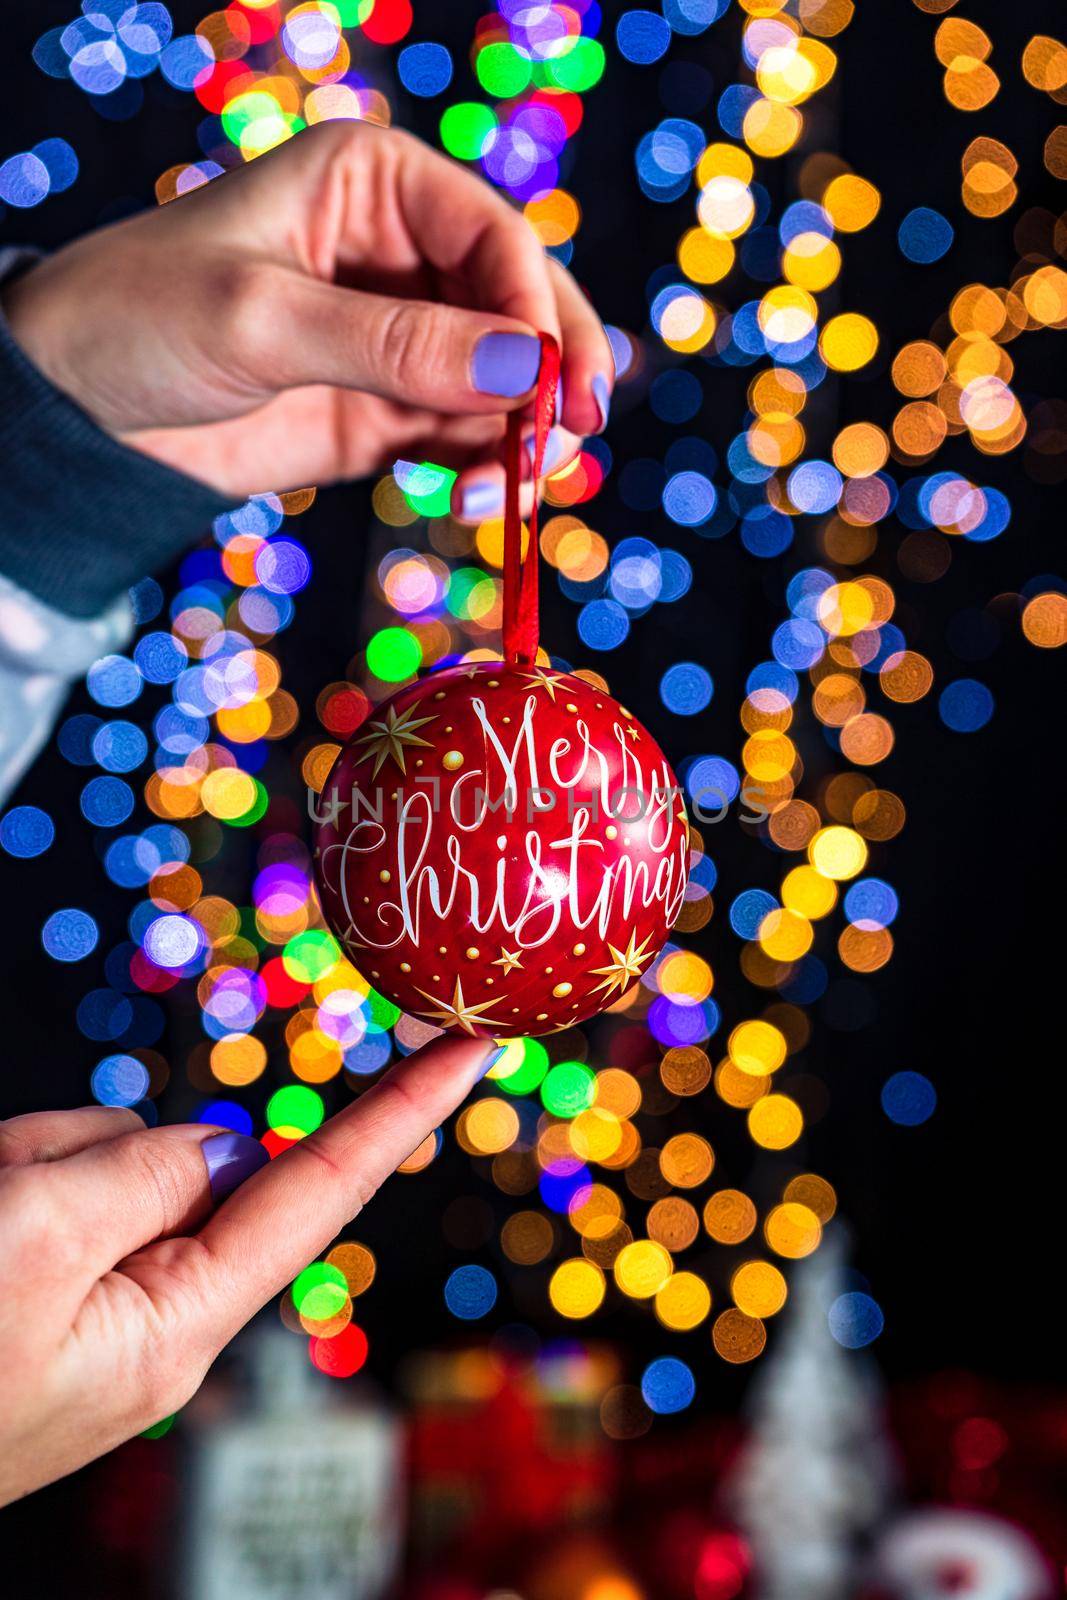 Holding Merry Christmas bauble decoration isolated on background with blurred lights. December season, Christmas composition.